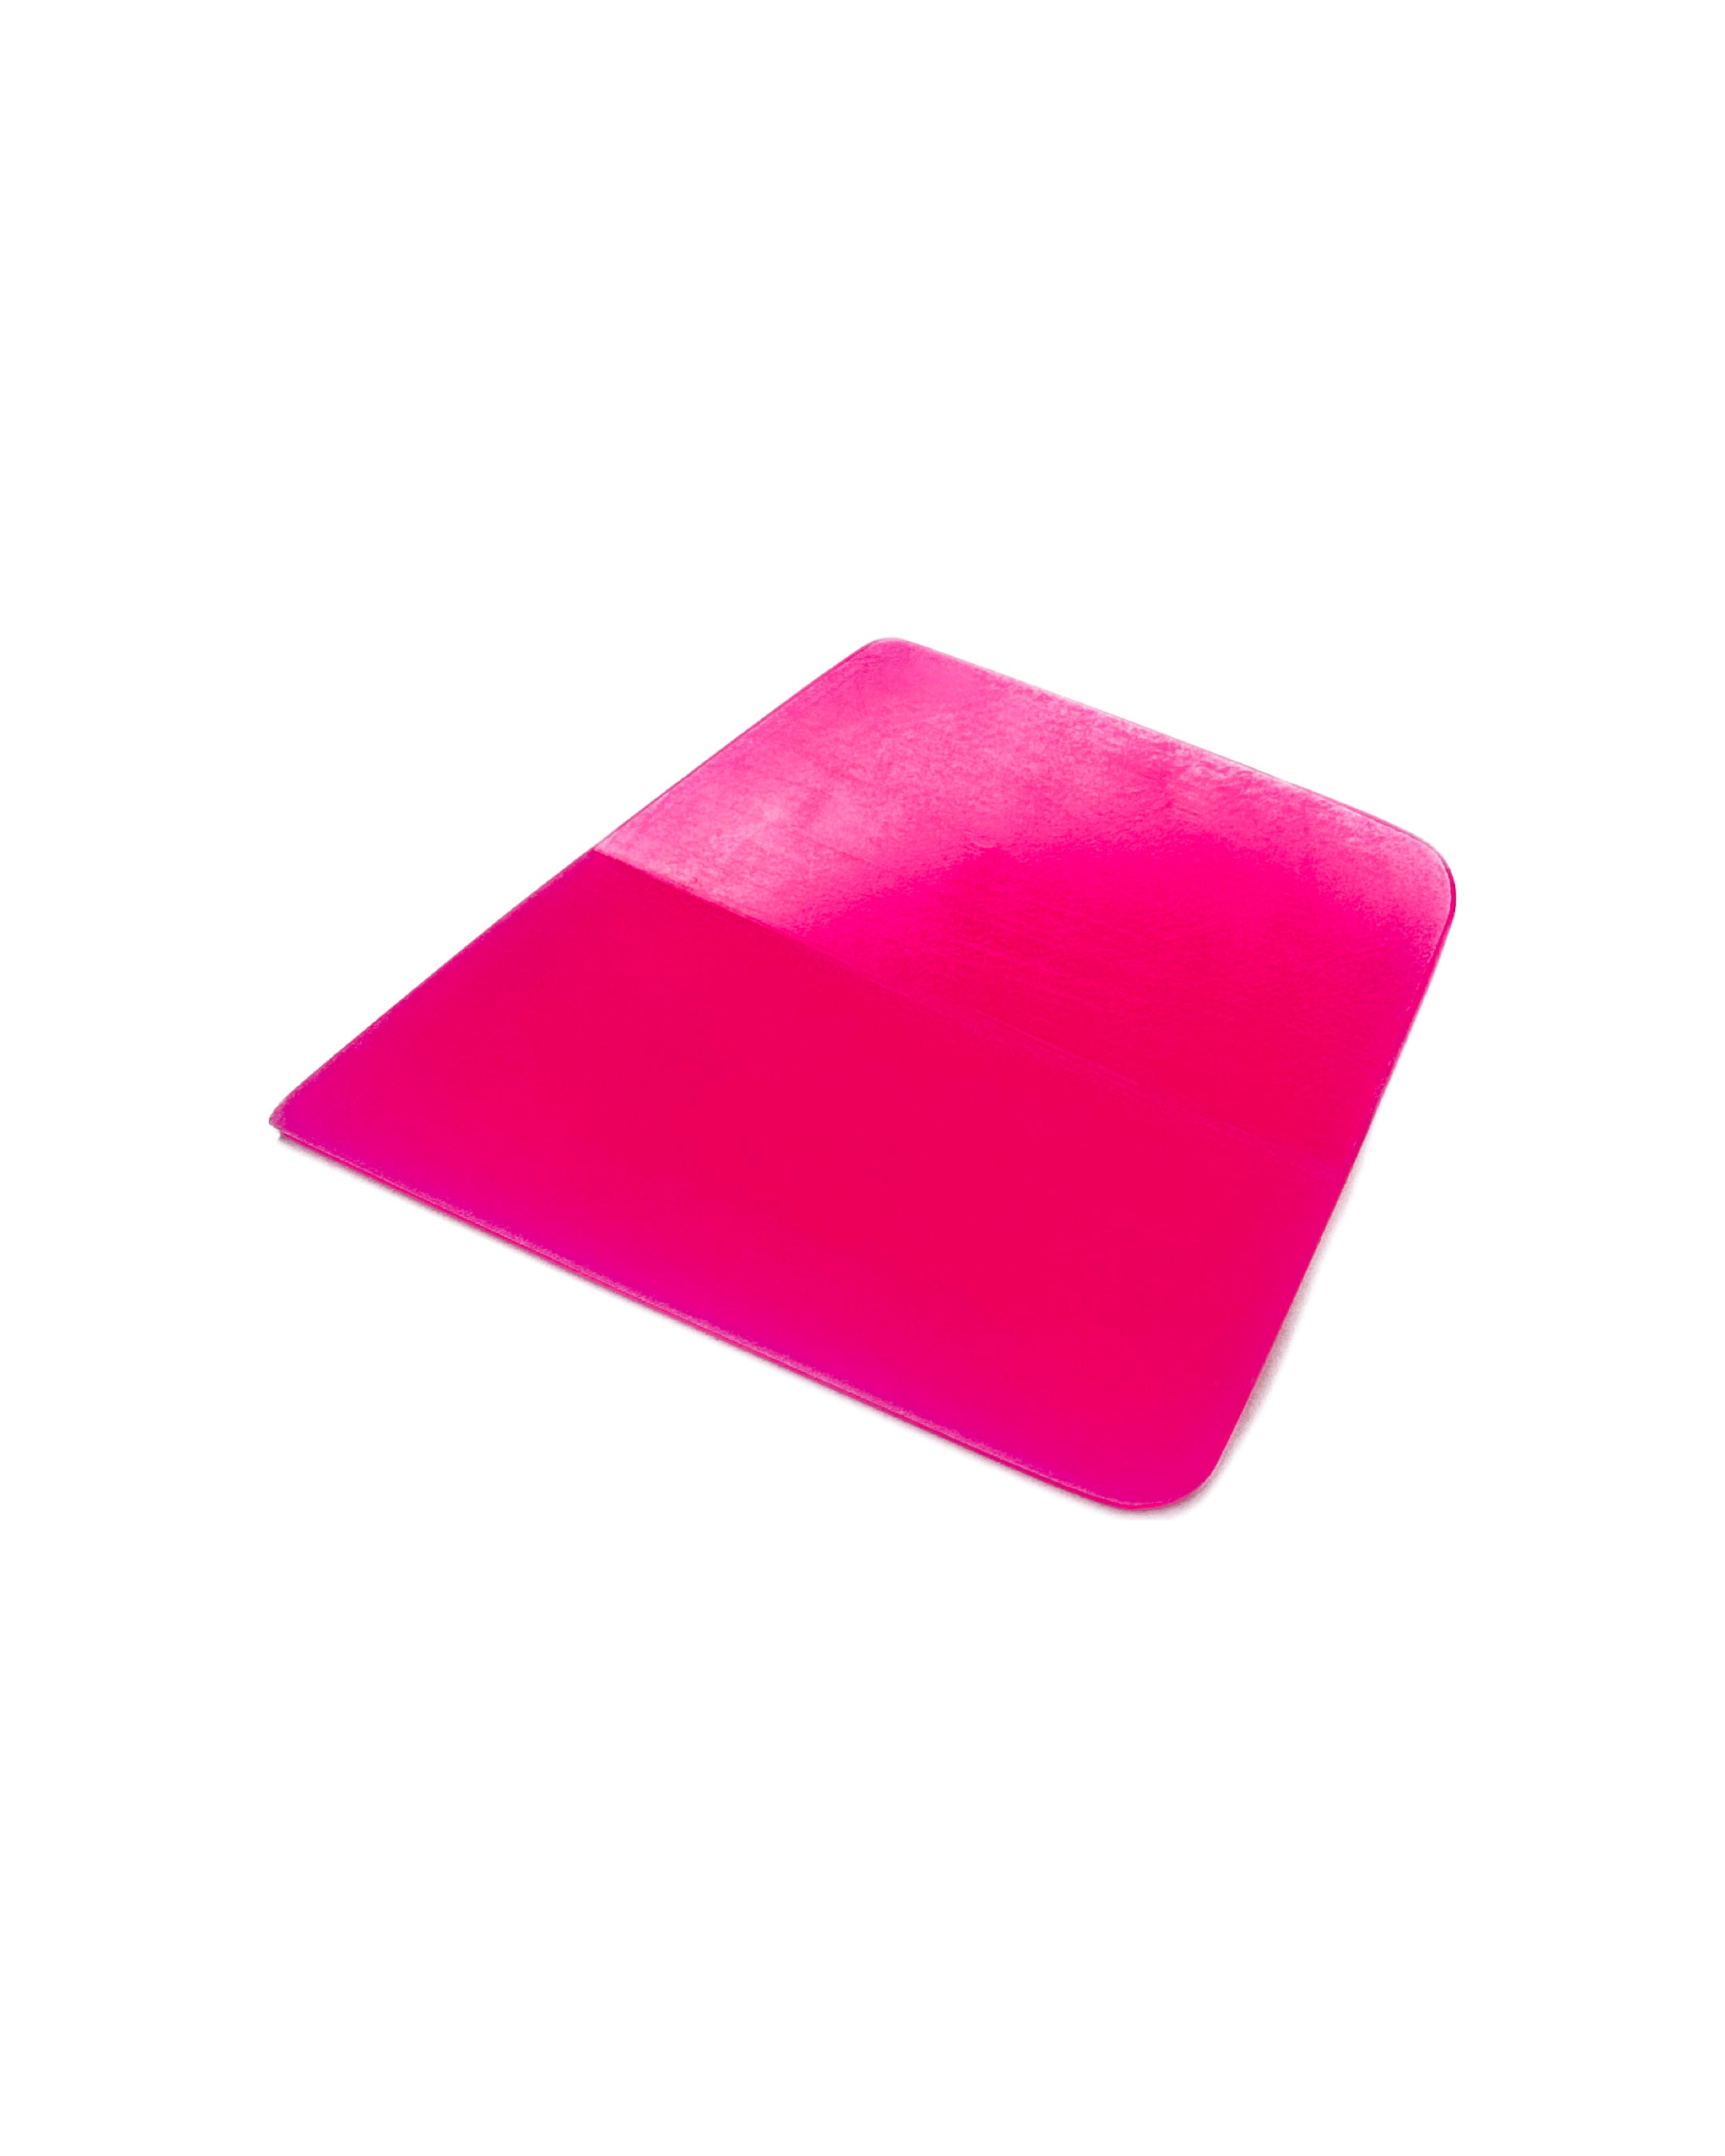 Angled PPF & Tint Squeegee